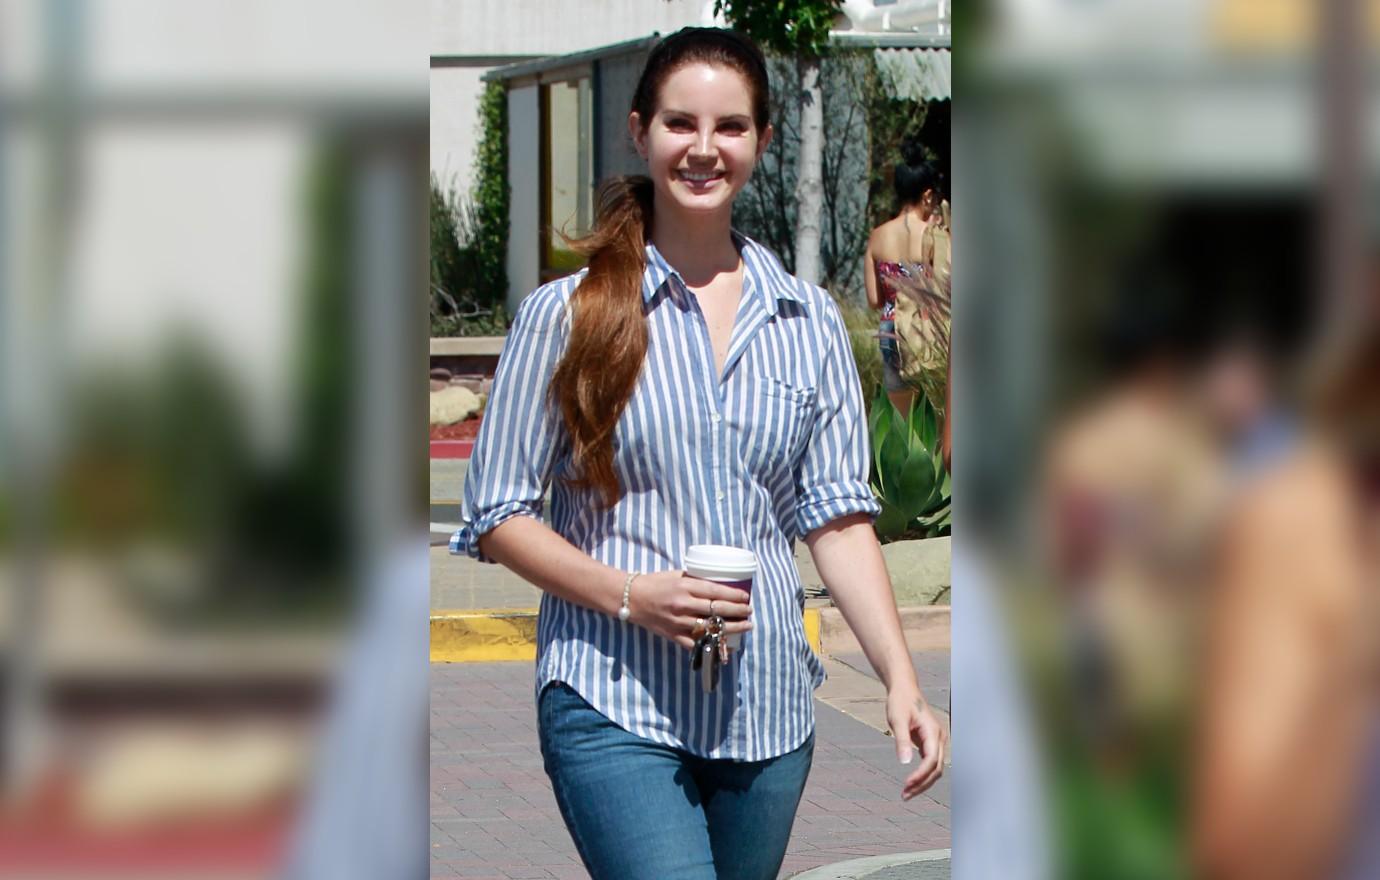 Lana Del Rey flaunts her legs in tiny denim shorts as she stops by 7-Eleven